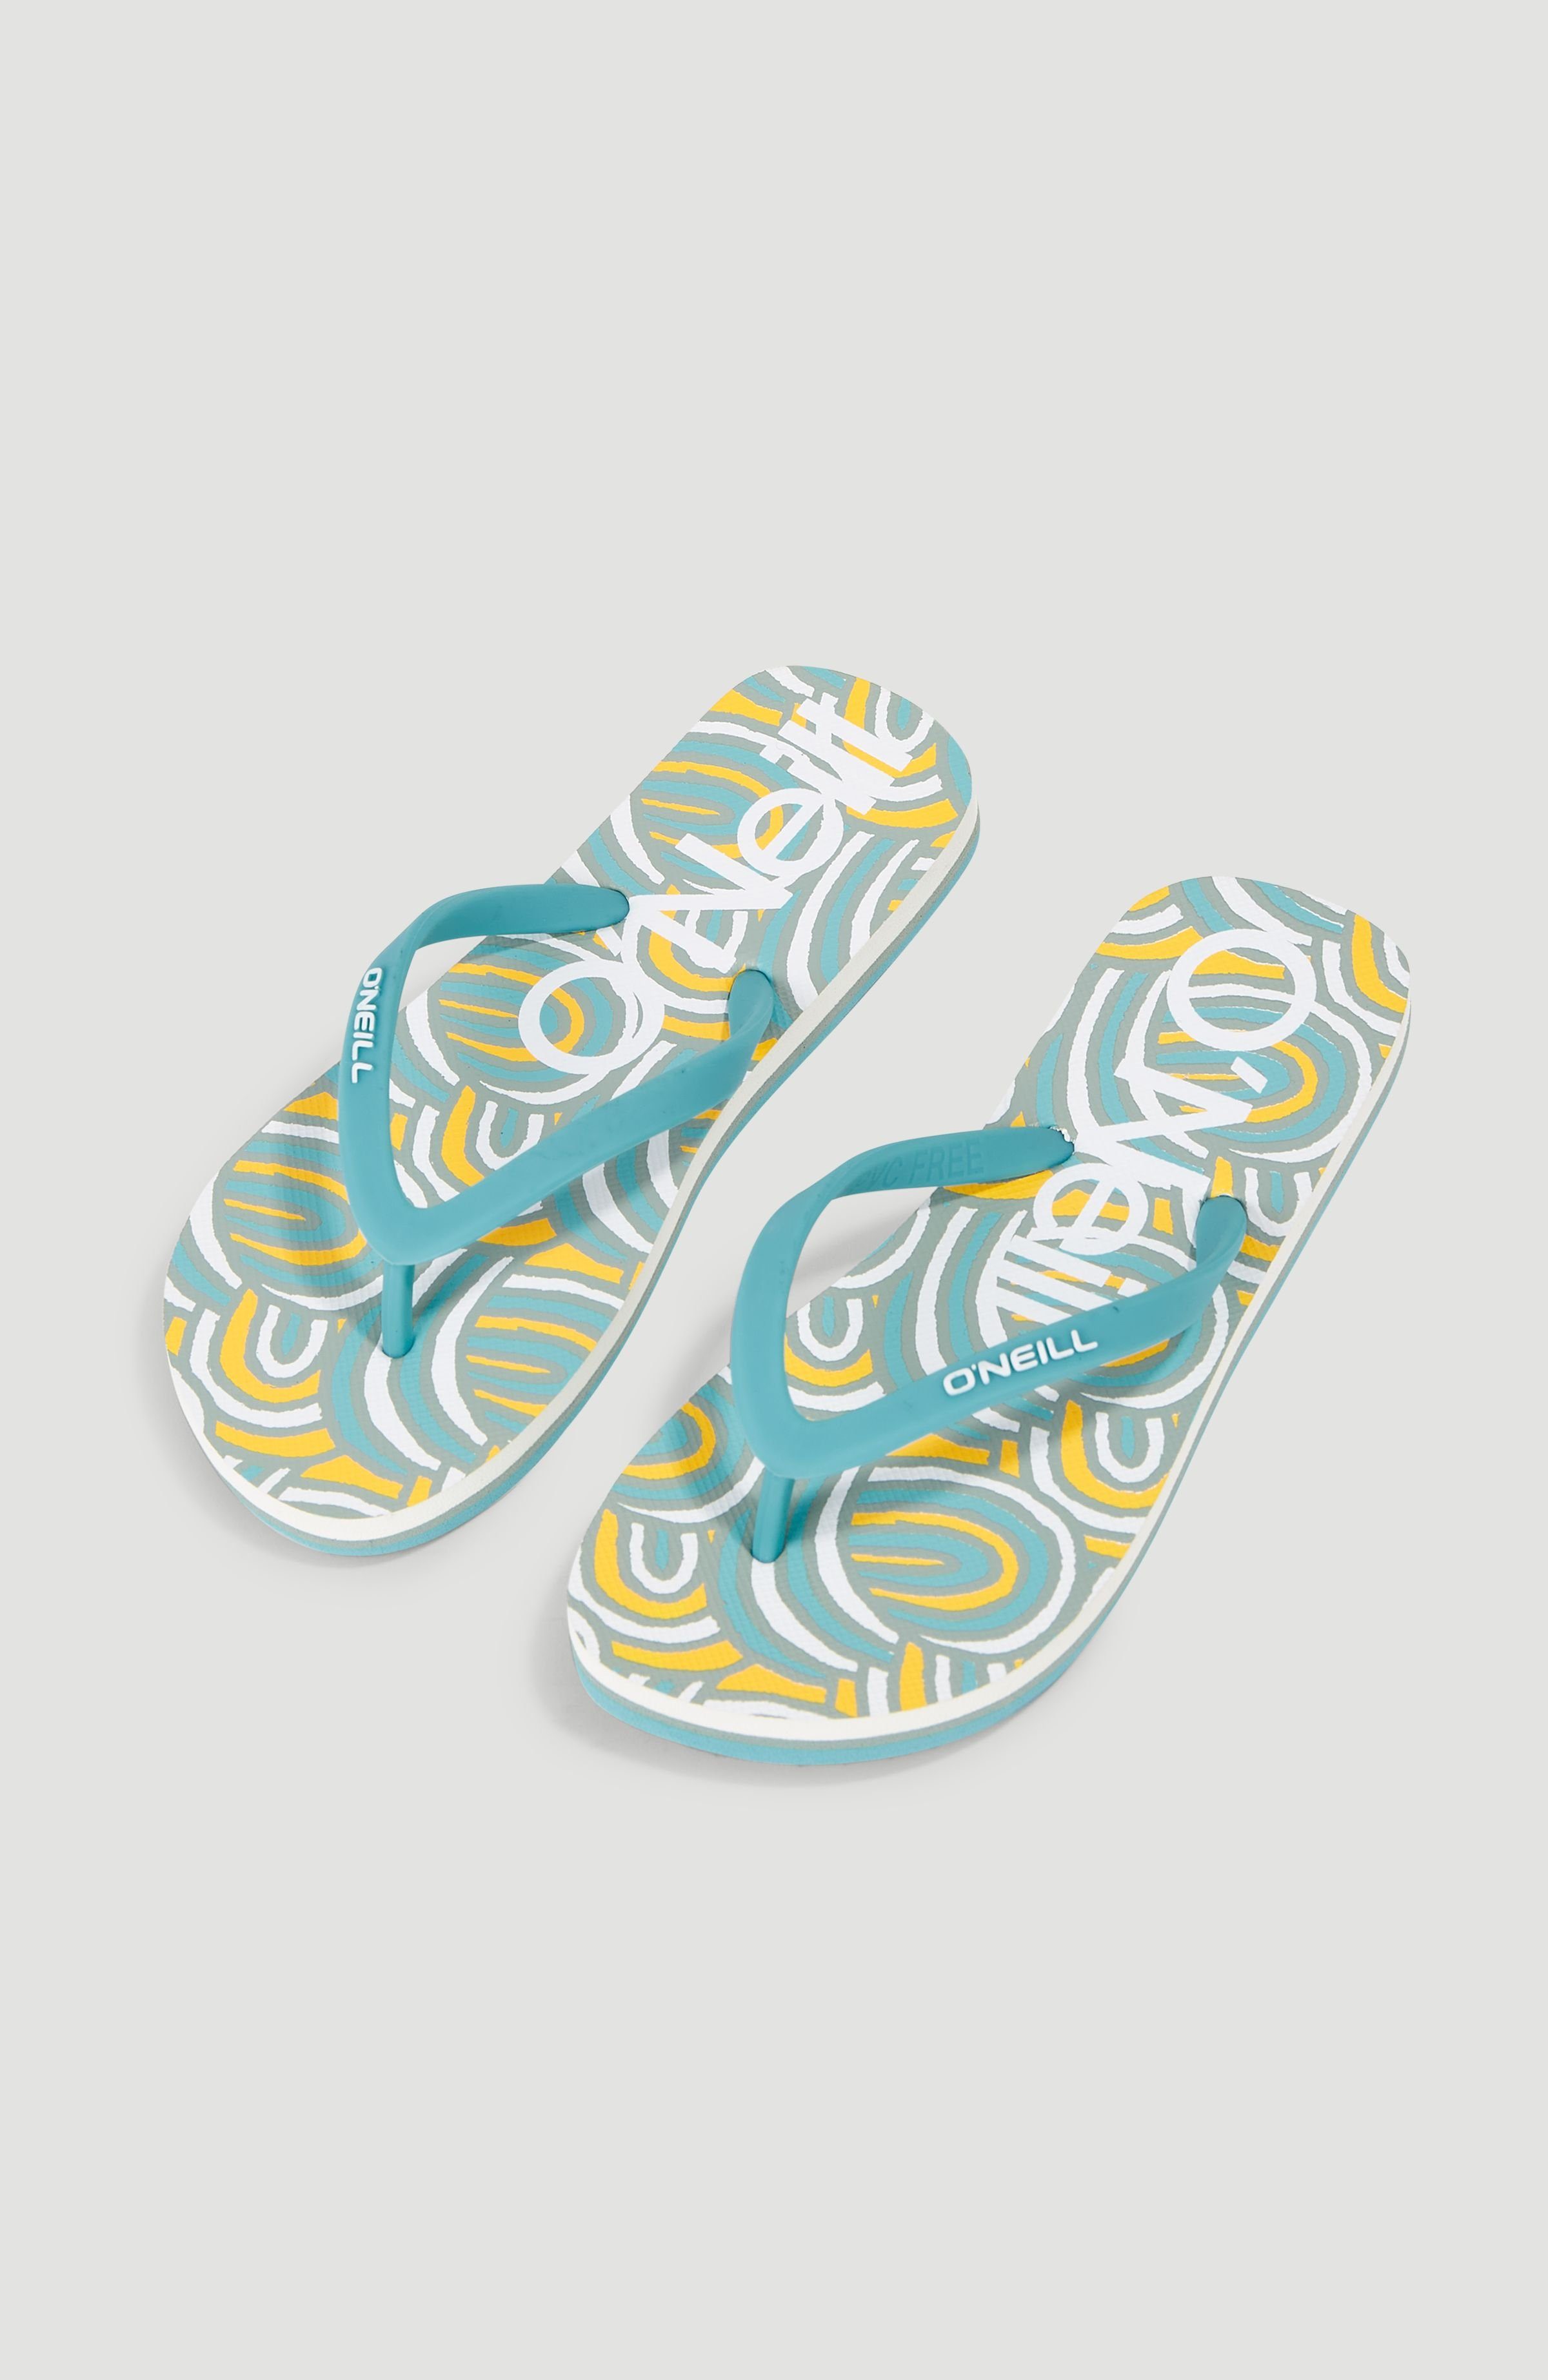 O'Neill PROFILE GRAPHIC SANDALS Zehentrenner